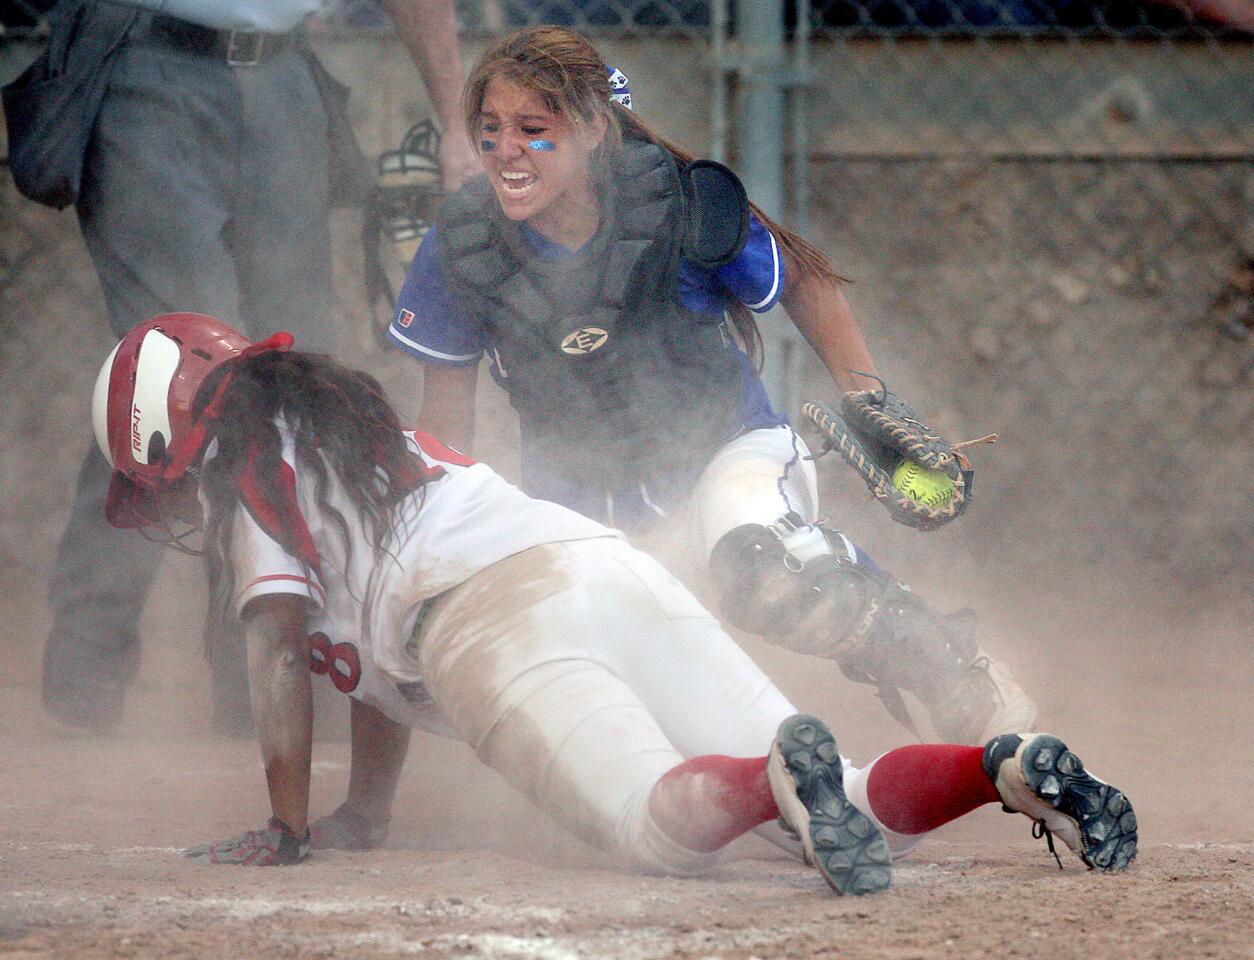 Burbank catcher Bridgette Pisa reacts after a collision at home plate with Burroughs' Michelle Santiago during a game on Thursday, April 24, 2014. (Roger Wilson/Staff Photographer)